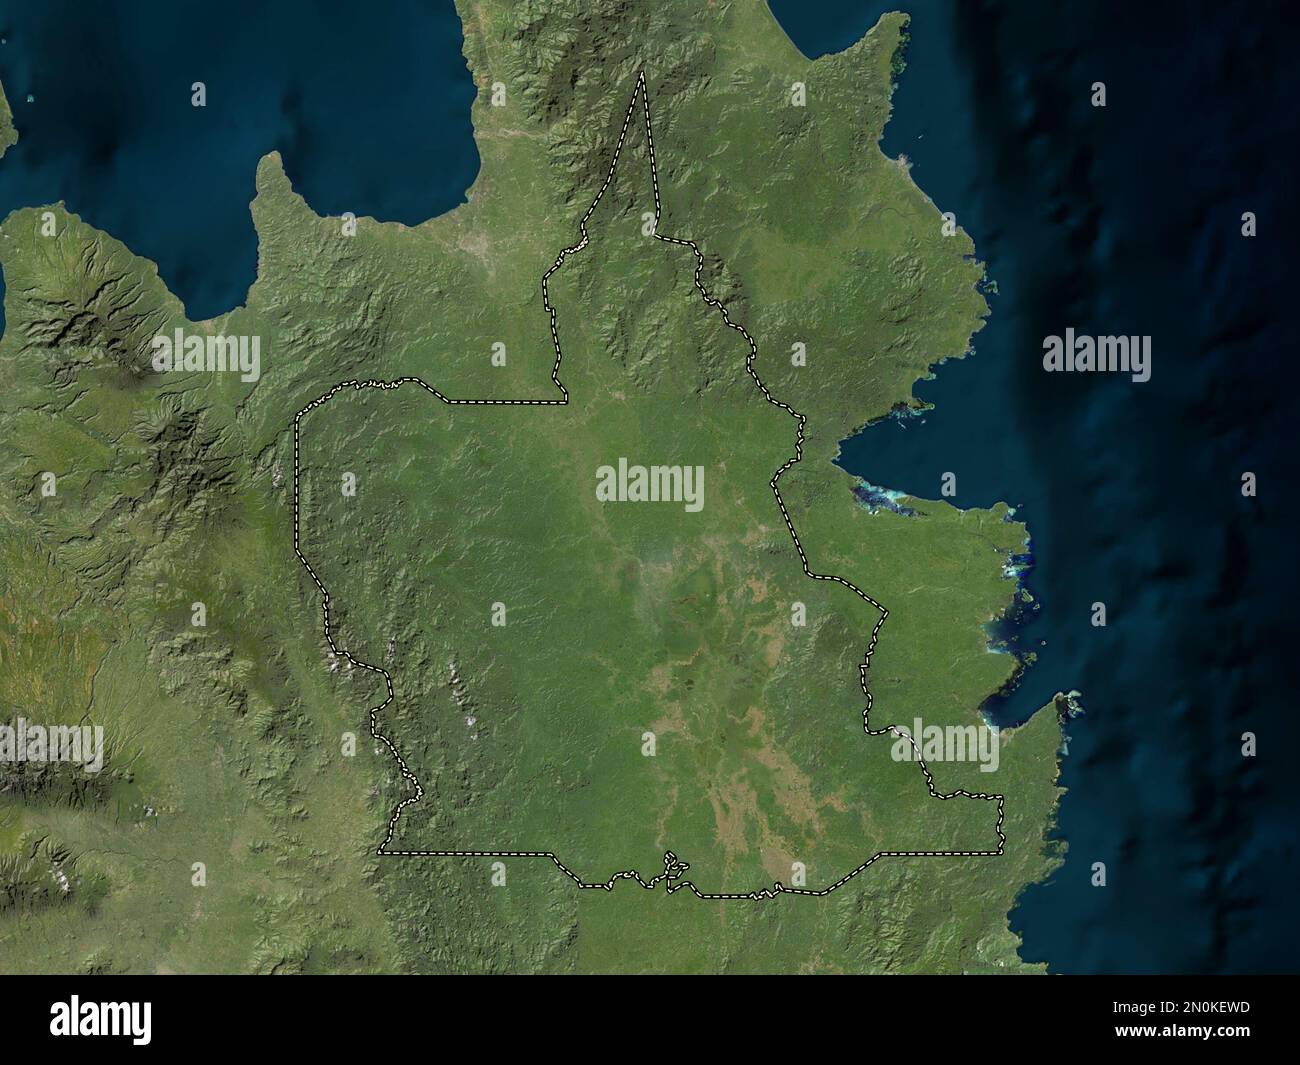 Agusan del Sur, province of Philippines. Low resolution satellite map Stock Photo